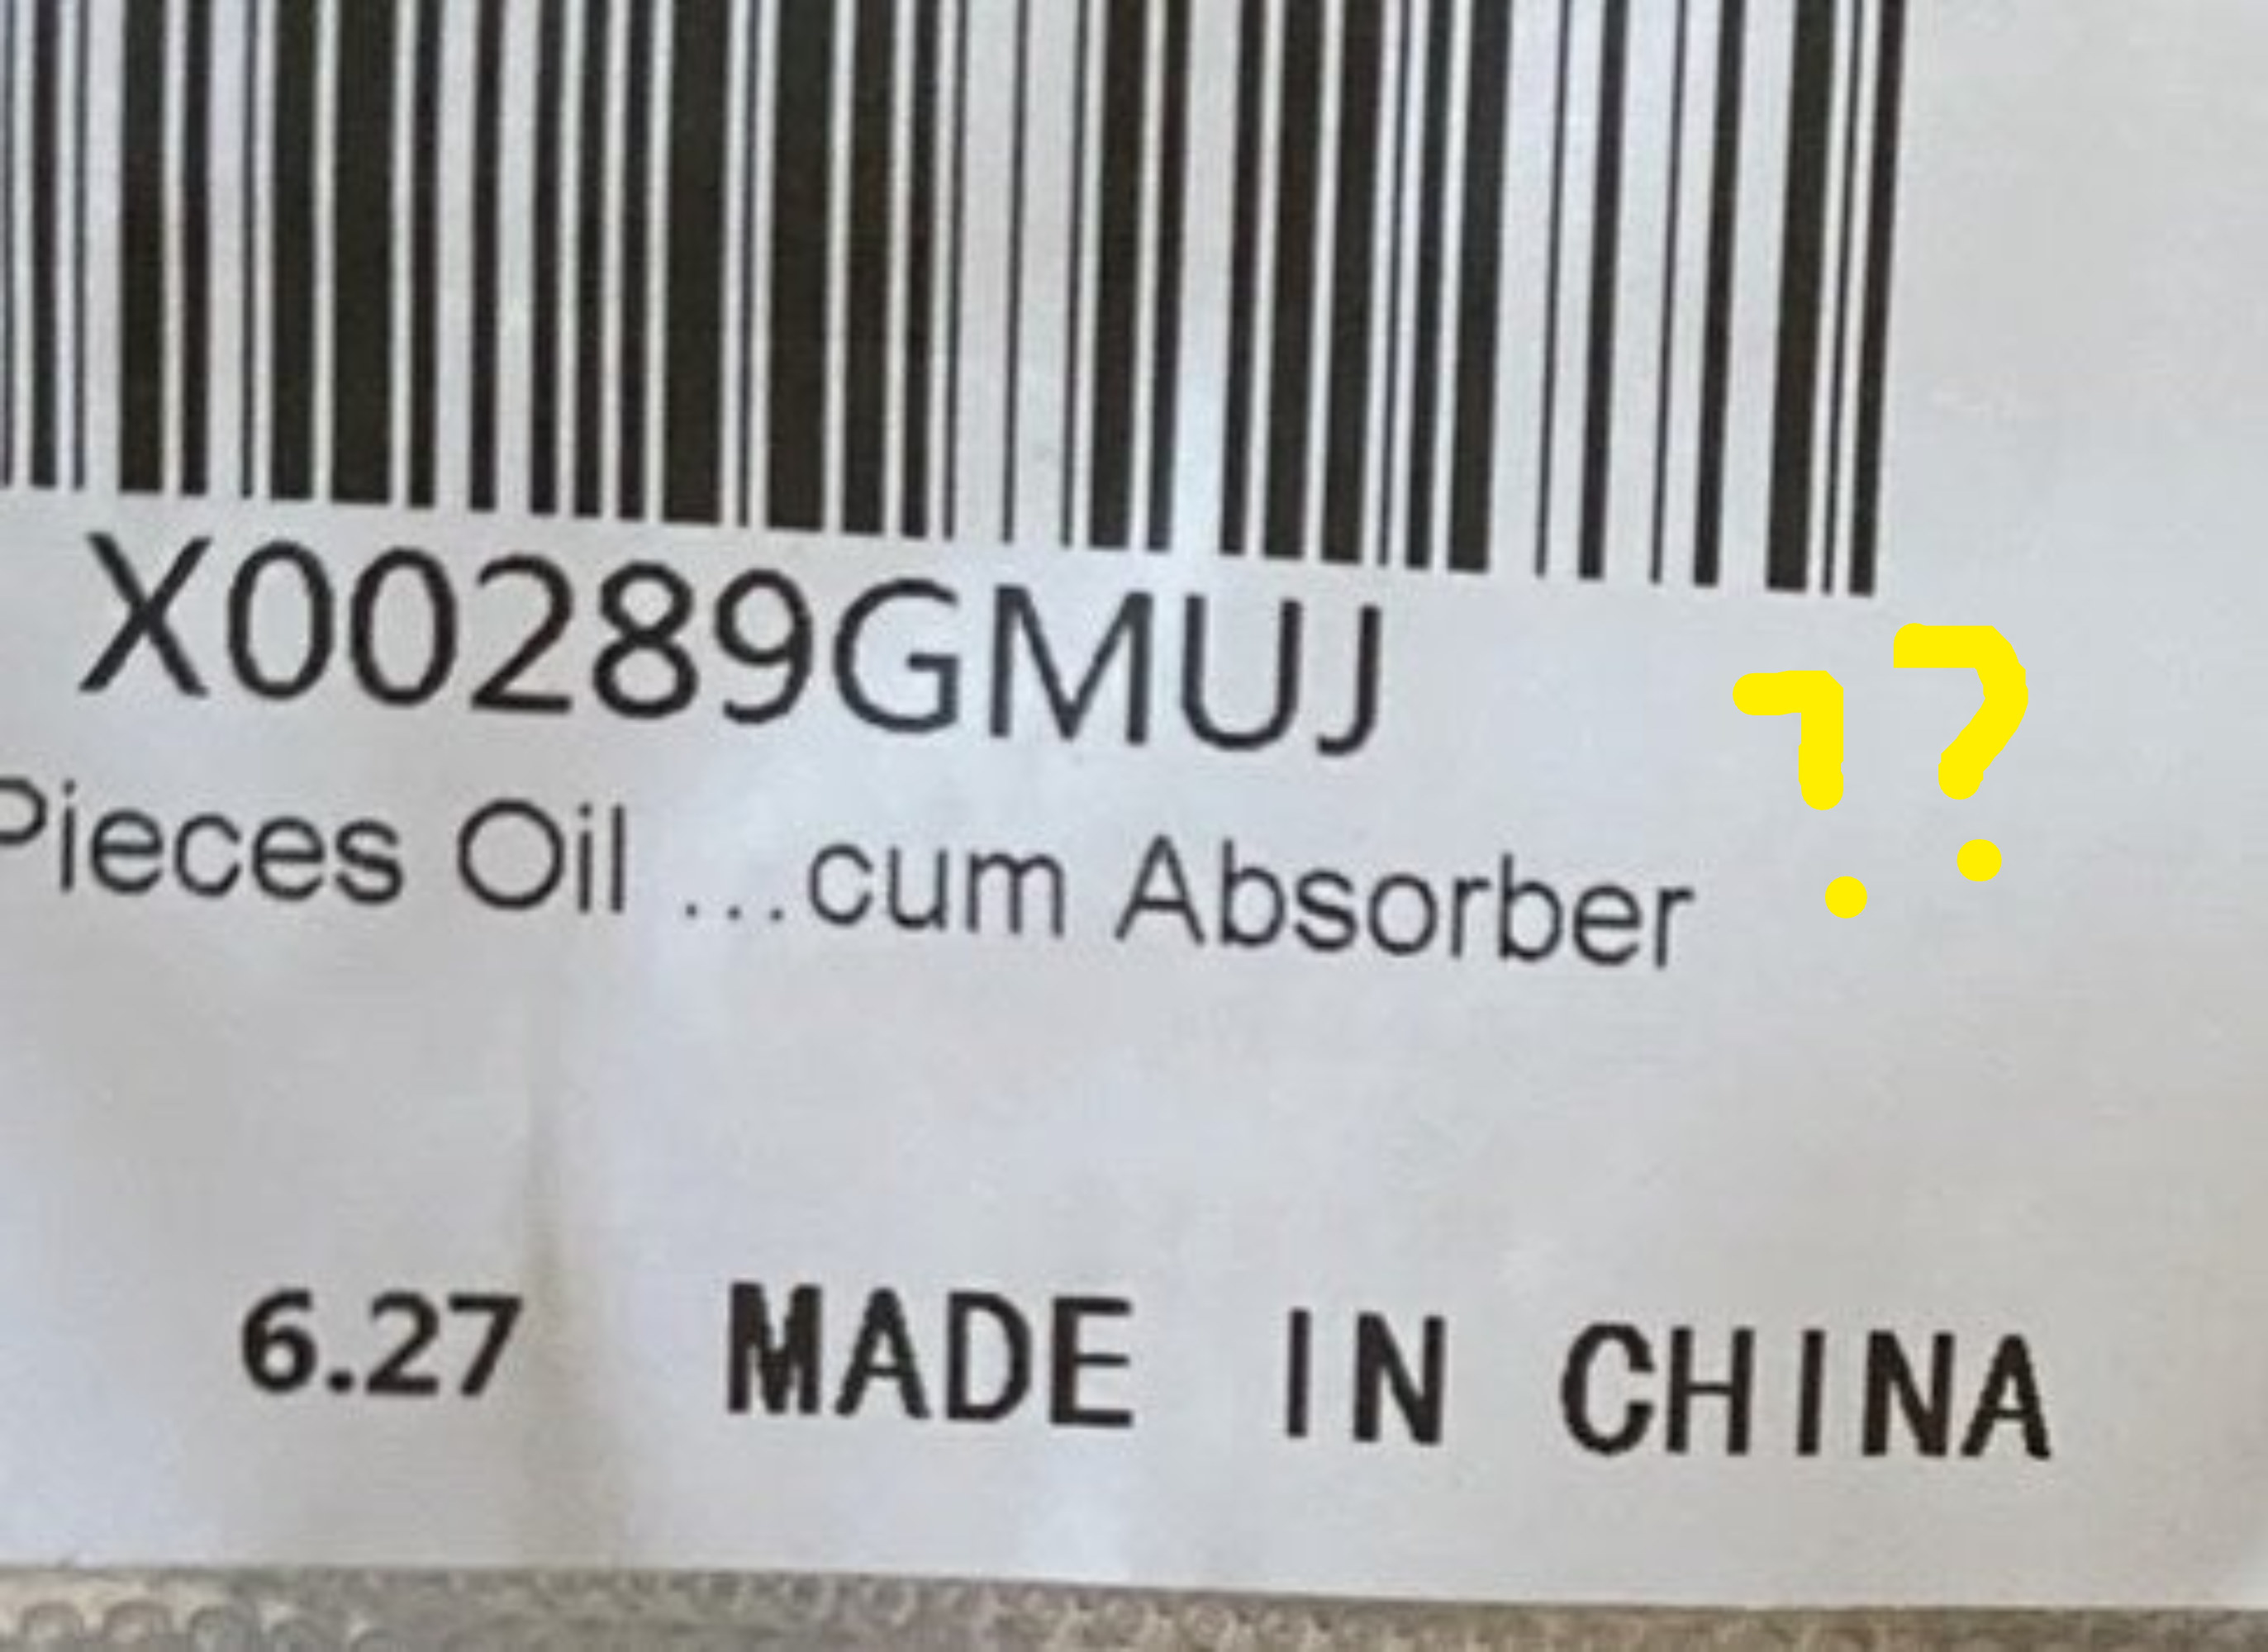 The item description on the package ends with &quot;cum absorber&quot;